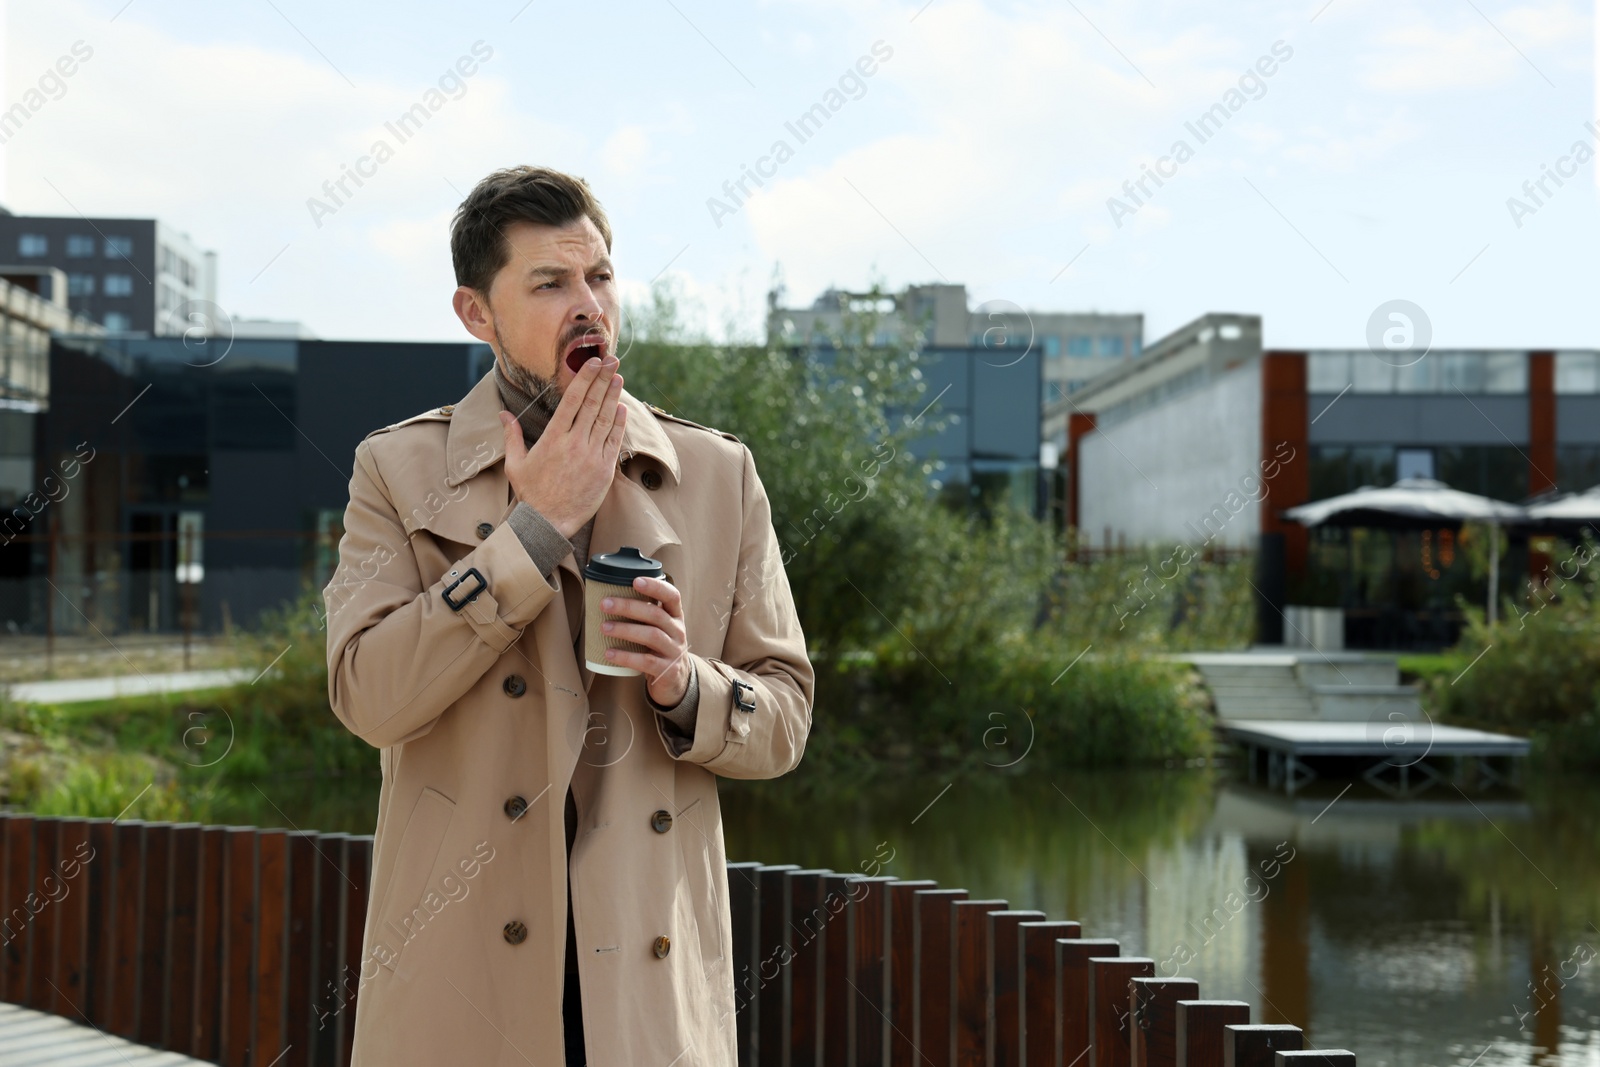 Photo of Sleepy man with cup of coffee yawning near river outdoors. Space for text